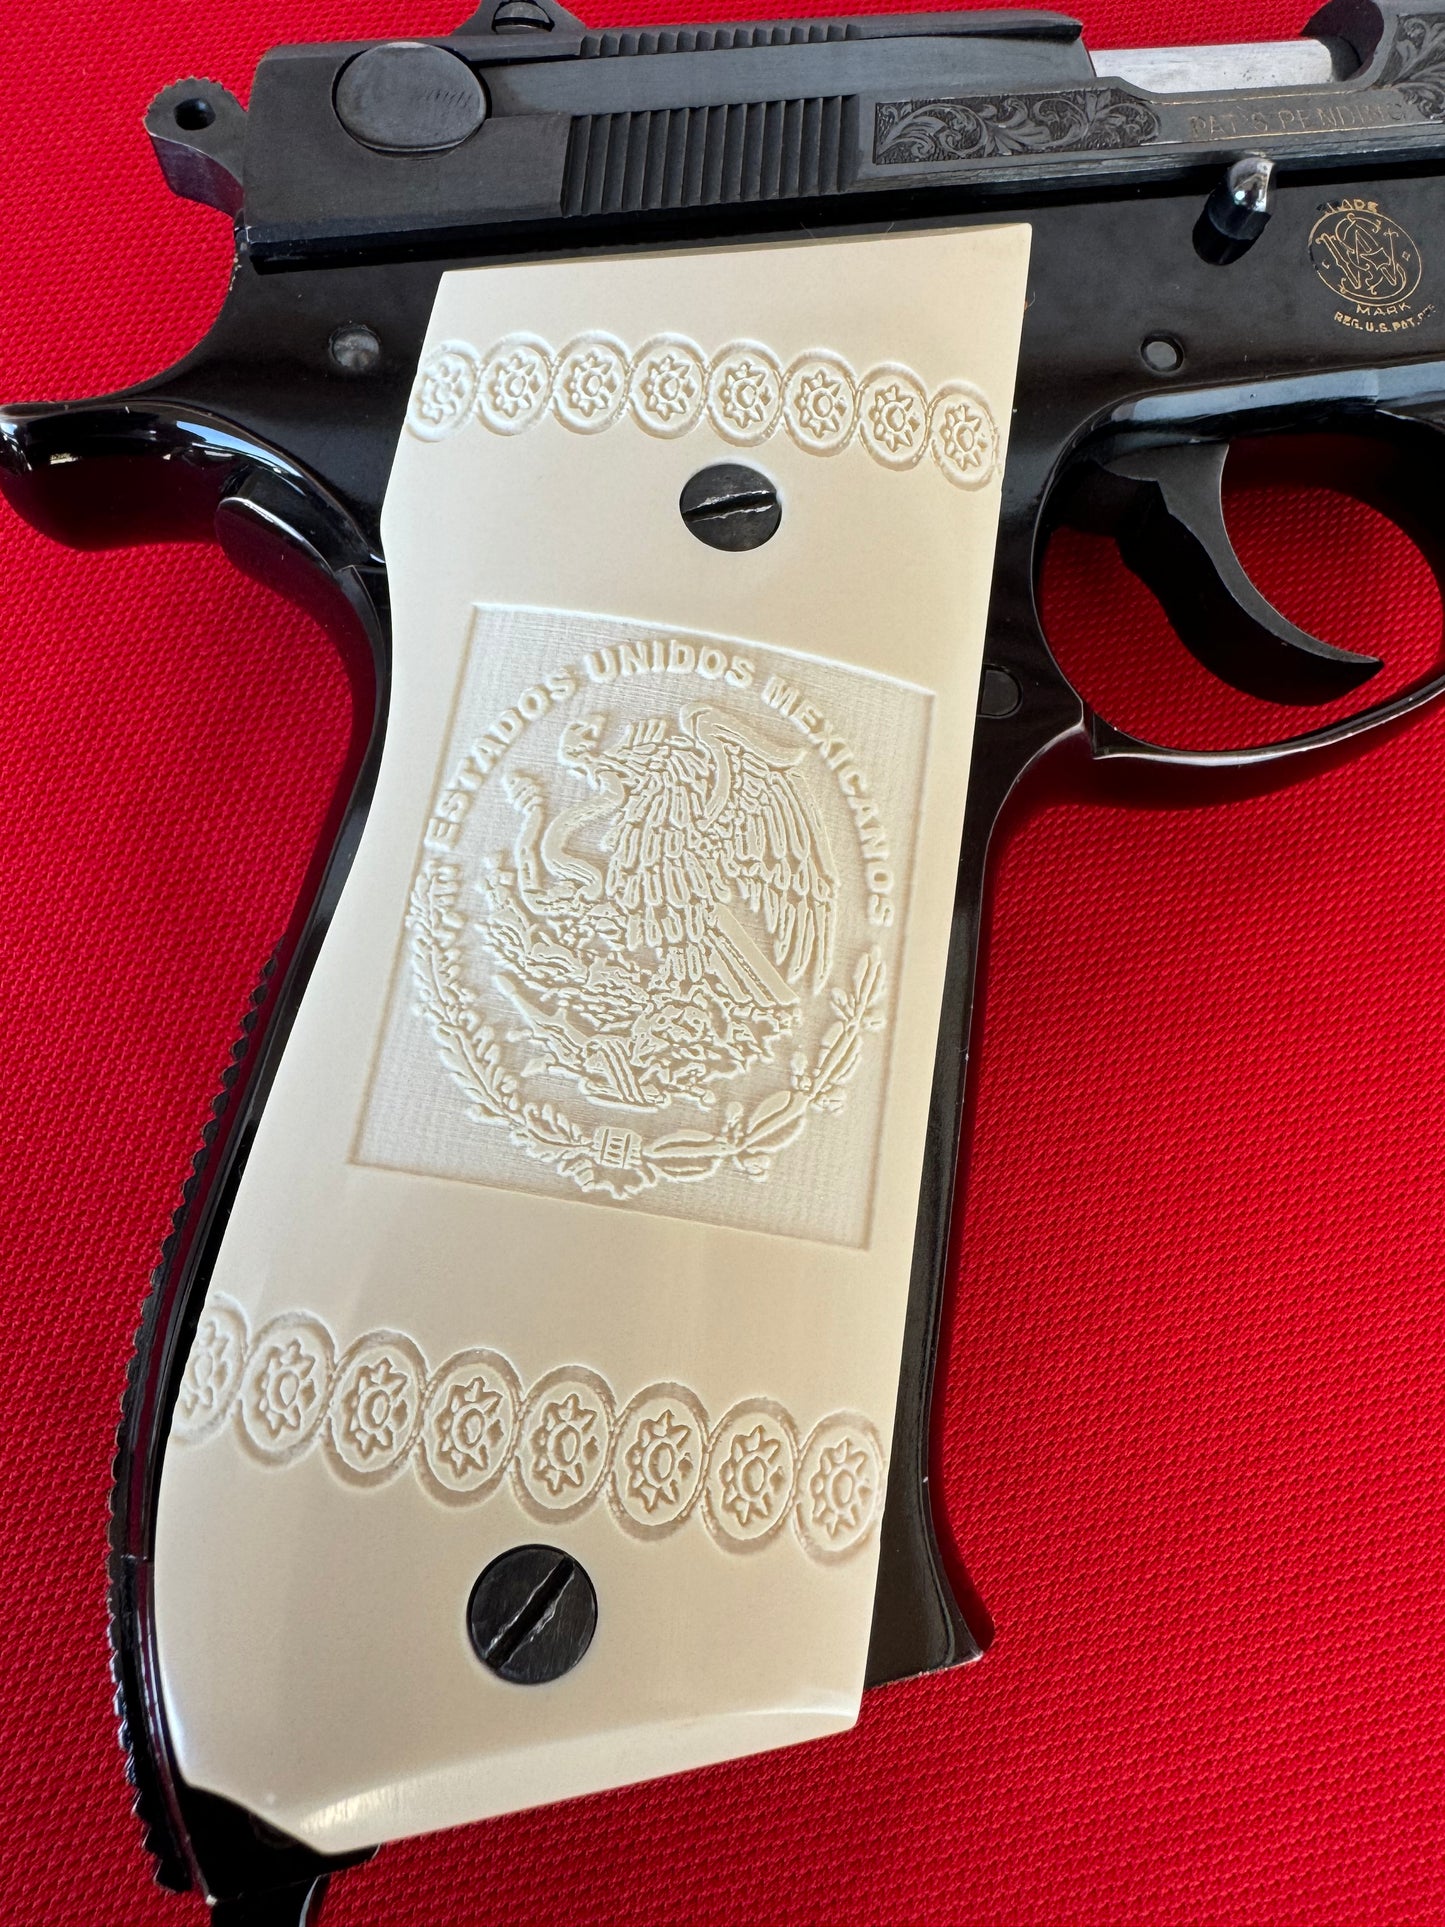 Smith & Wesson 9mm model 39 inlayed Estados Unidos Mexicanos Pistol Grips S&W faux ivory